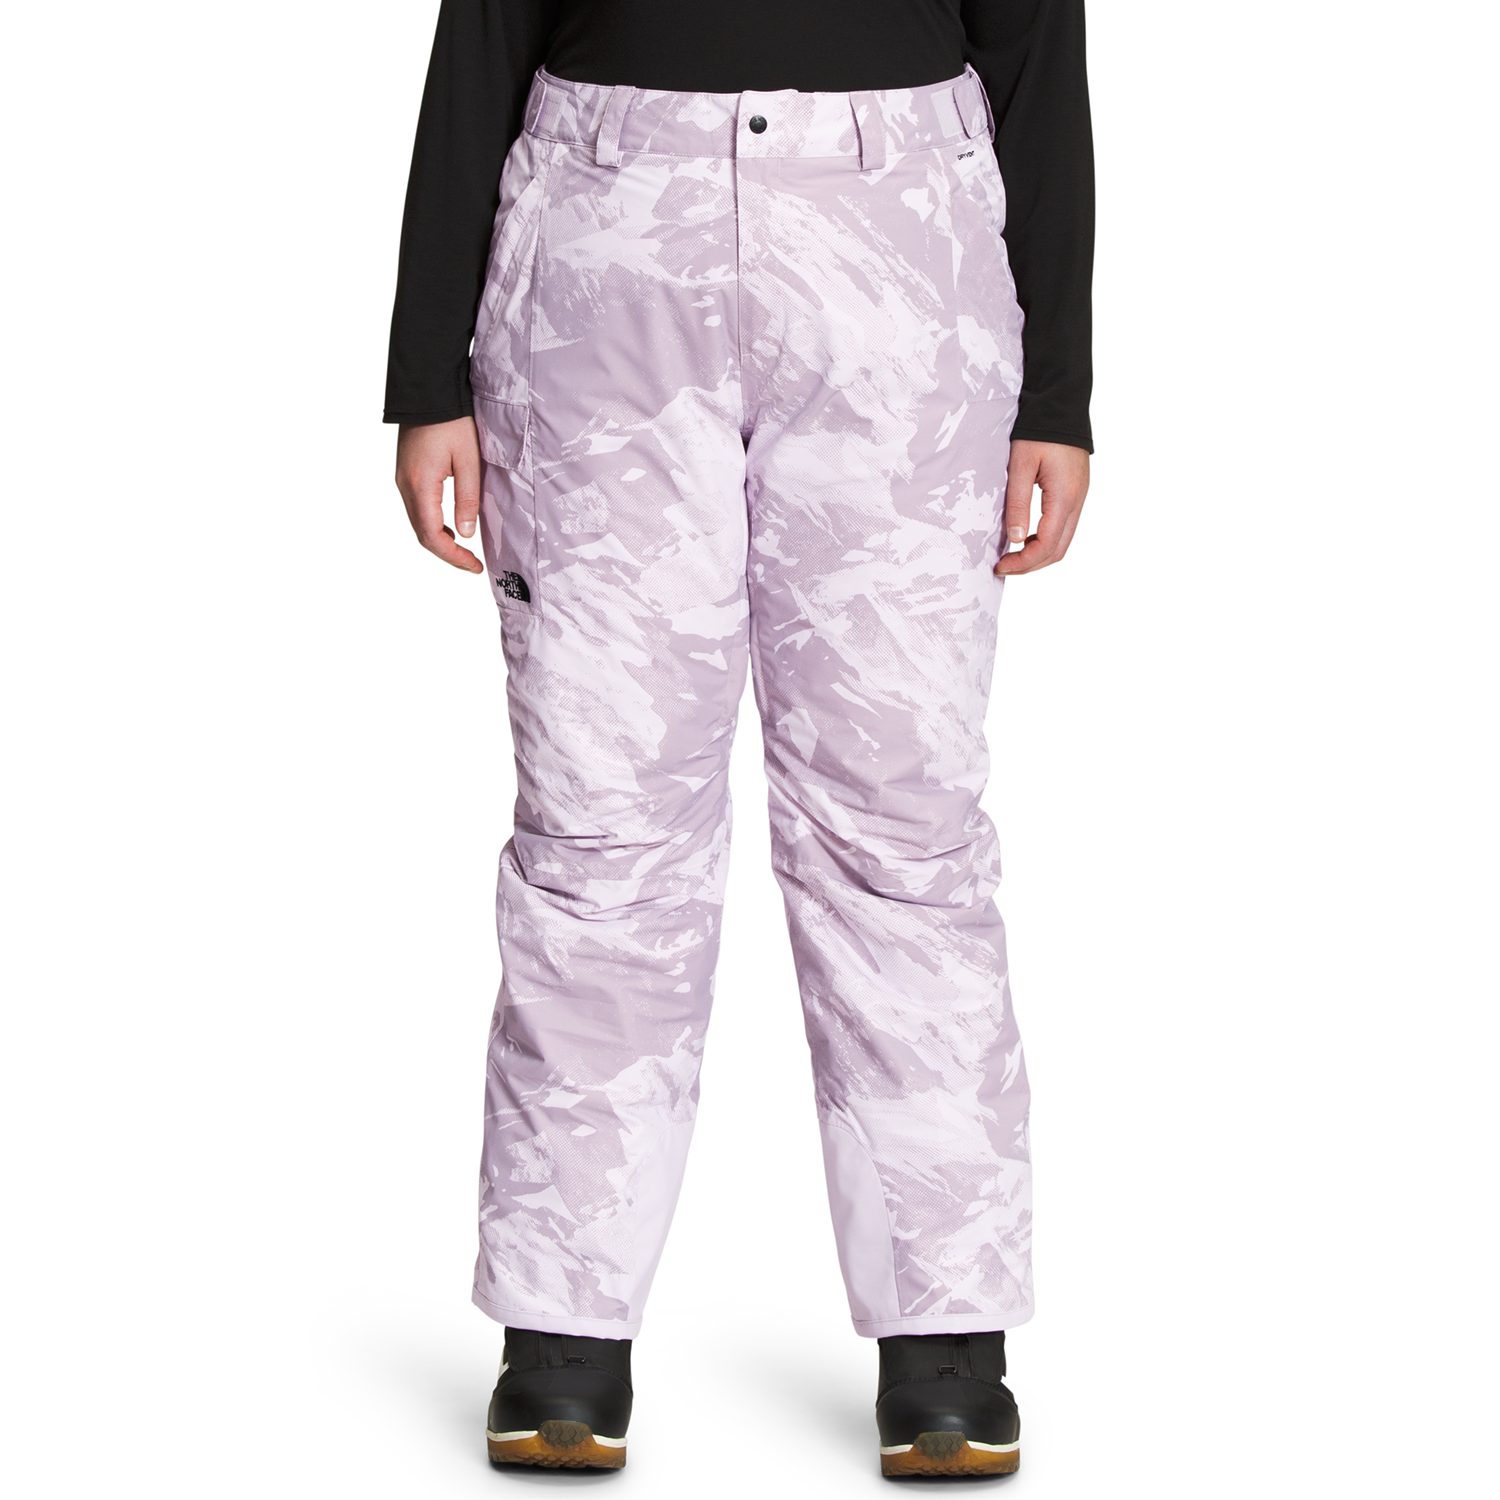 https://images.evo.com/imgp/zoom/224916/966957/the-north-face-freedom-insulated-plus-pants-women-s-.jpg